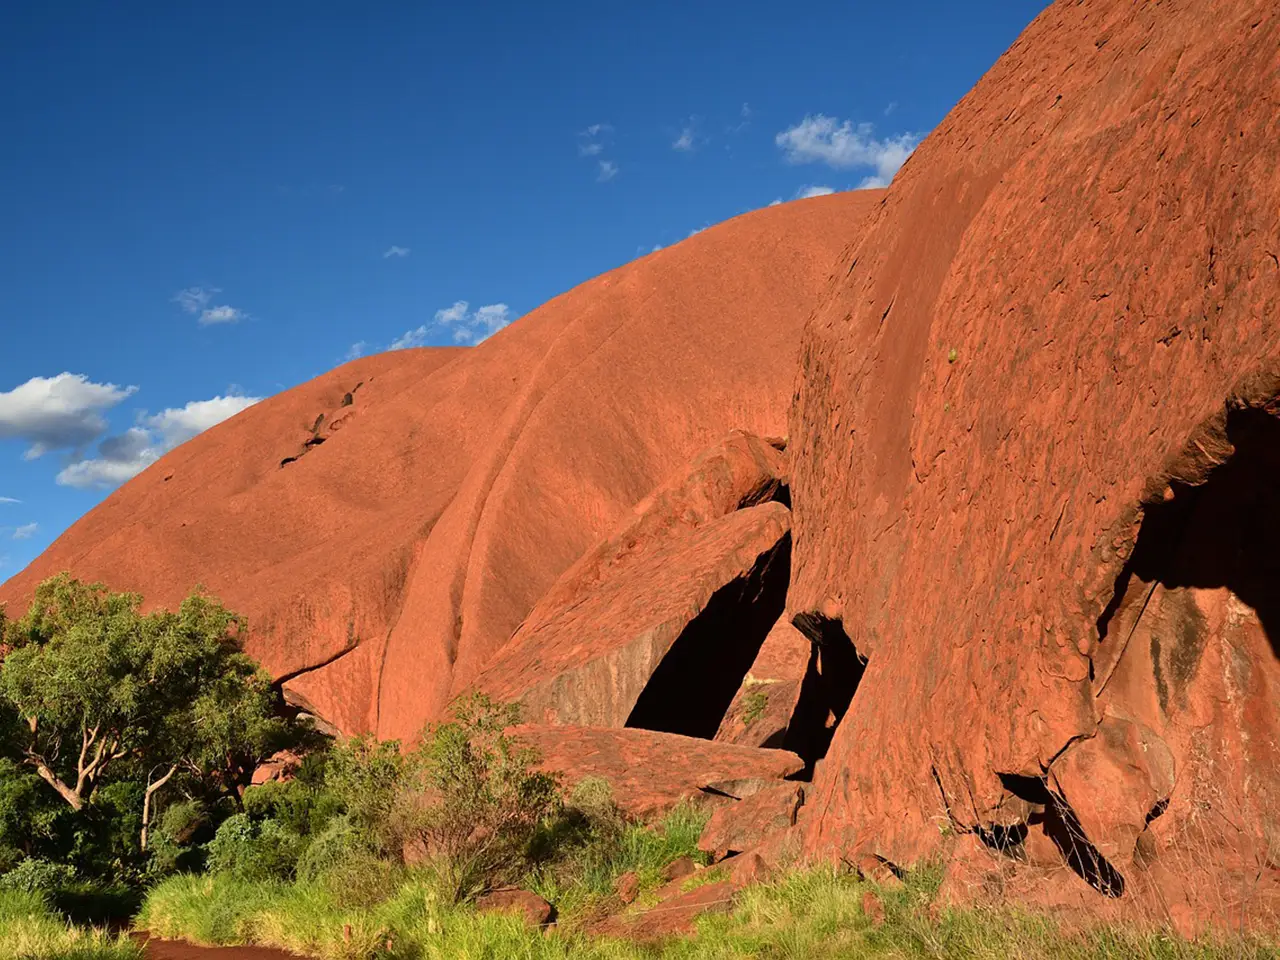 The Uluru, which in local Aboriginal tongue means "shadowy place," rises 348 meters above the plain below.